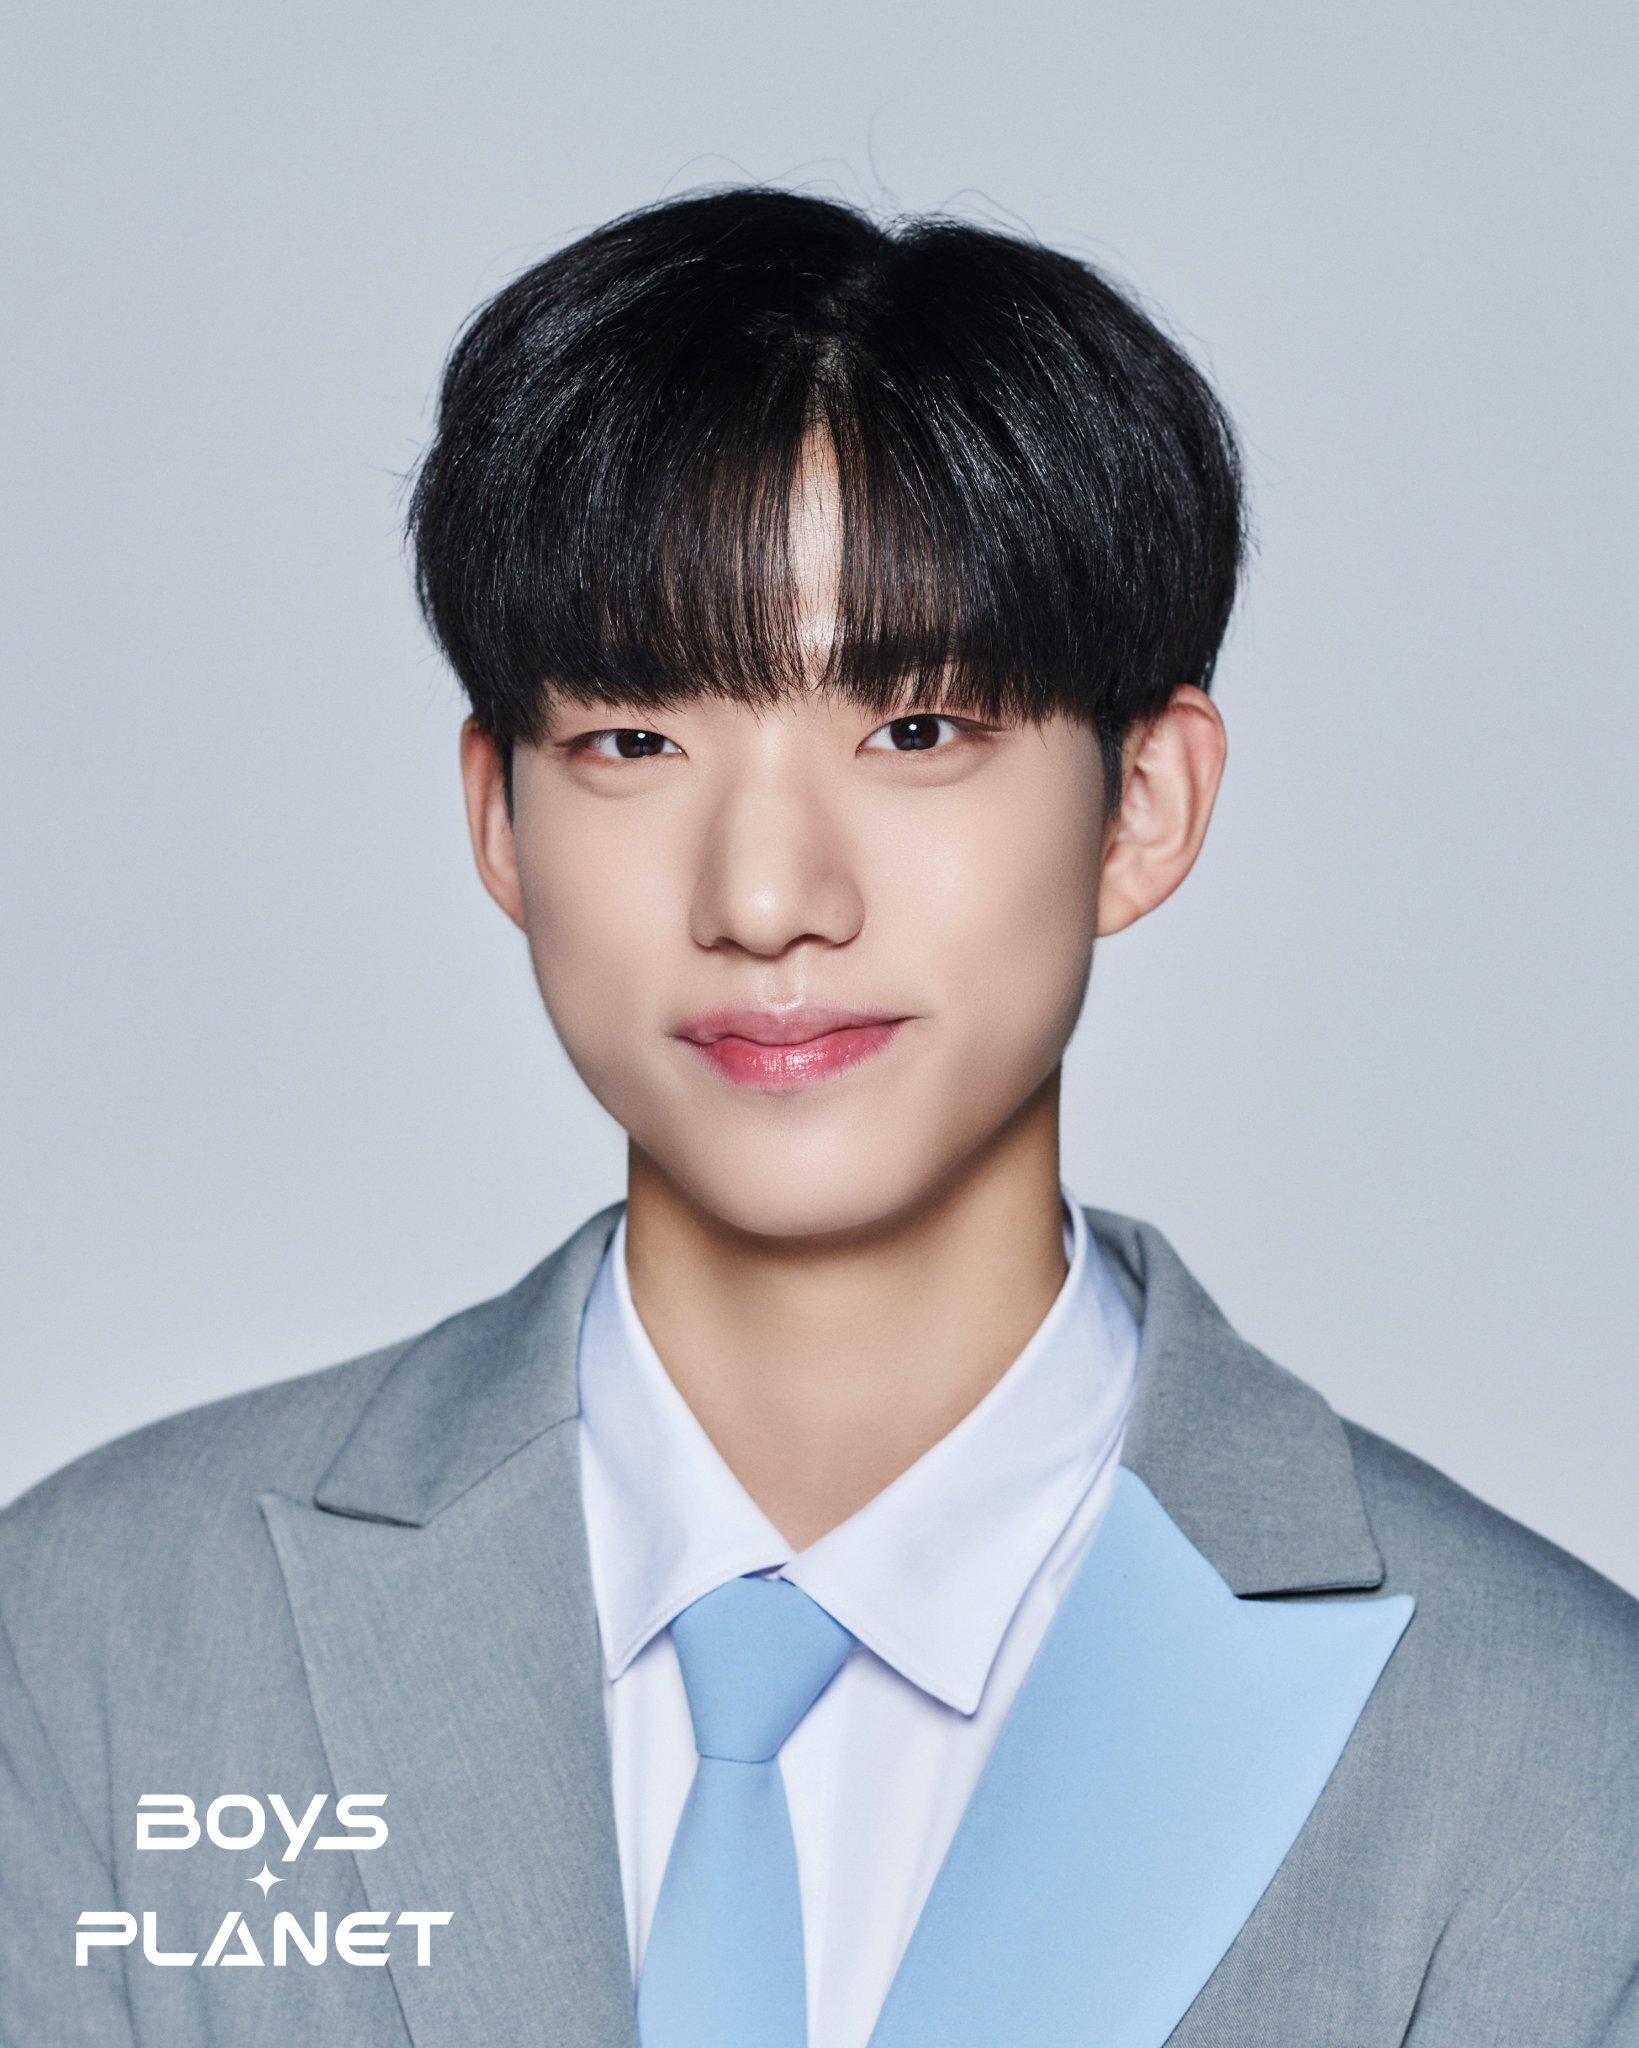 Boys Planet 2023 profile - K group - Park Hyun Been | kpopping